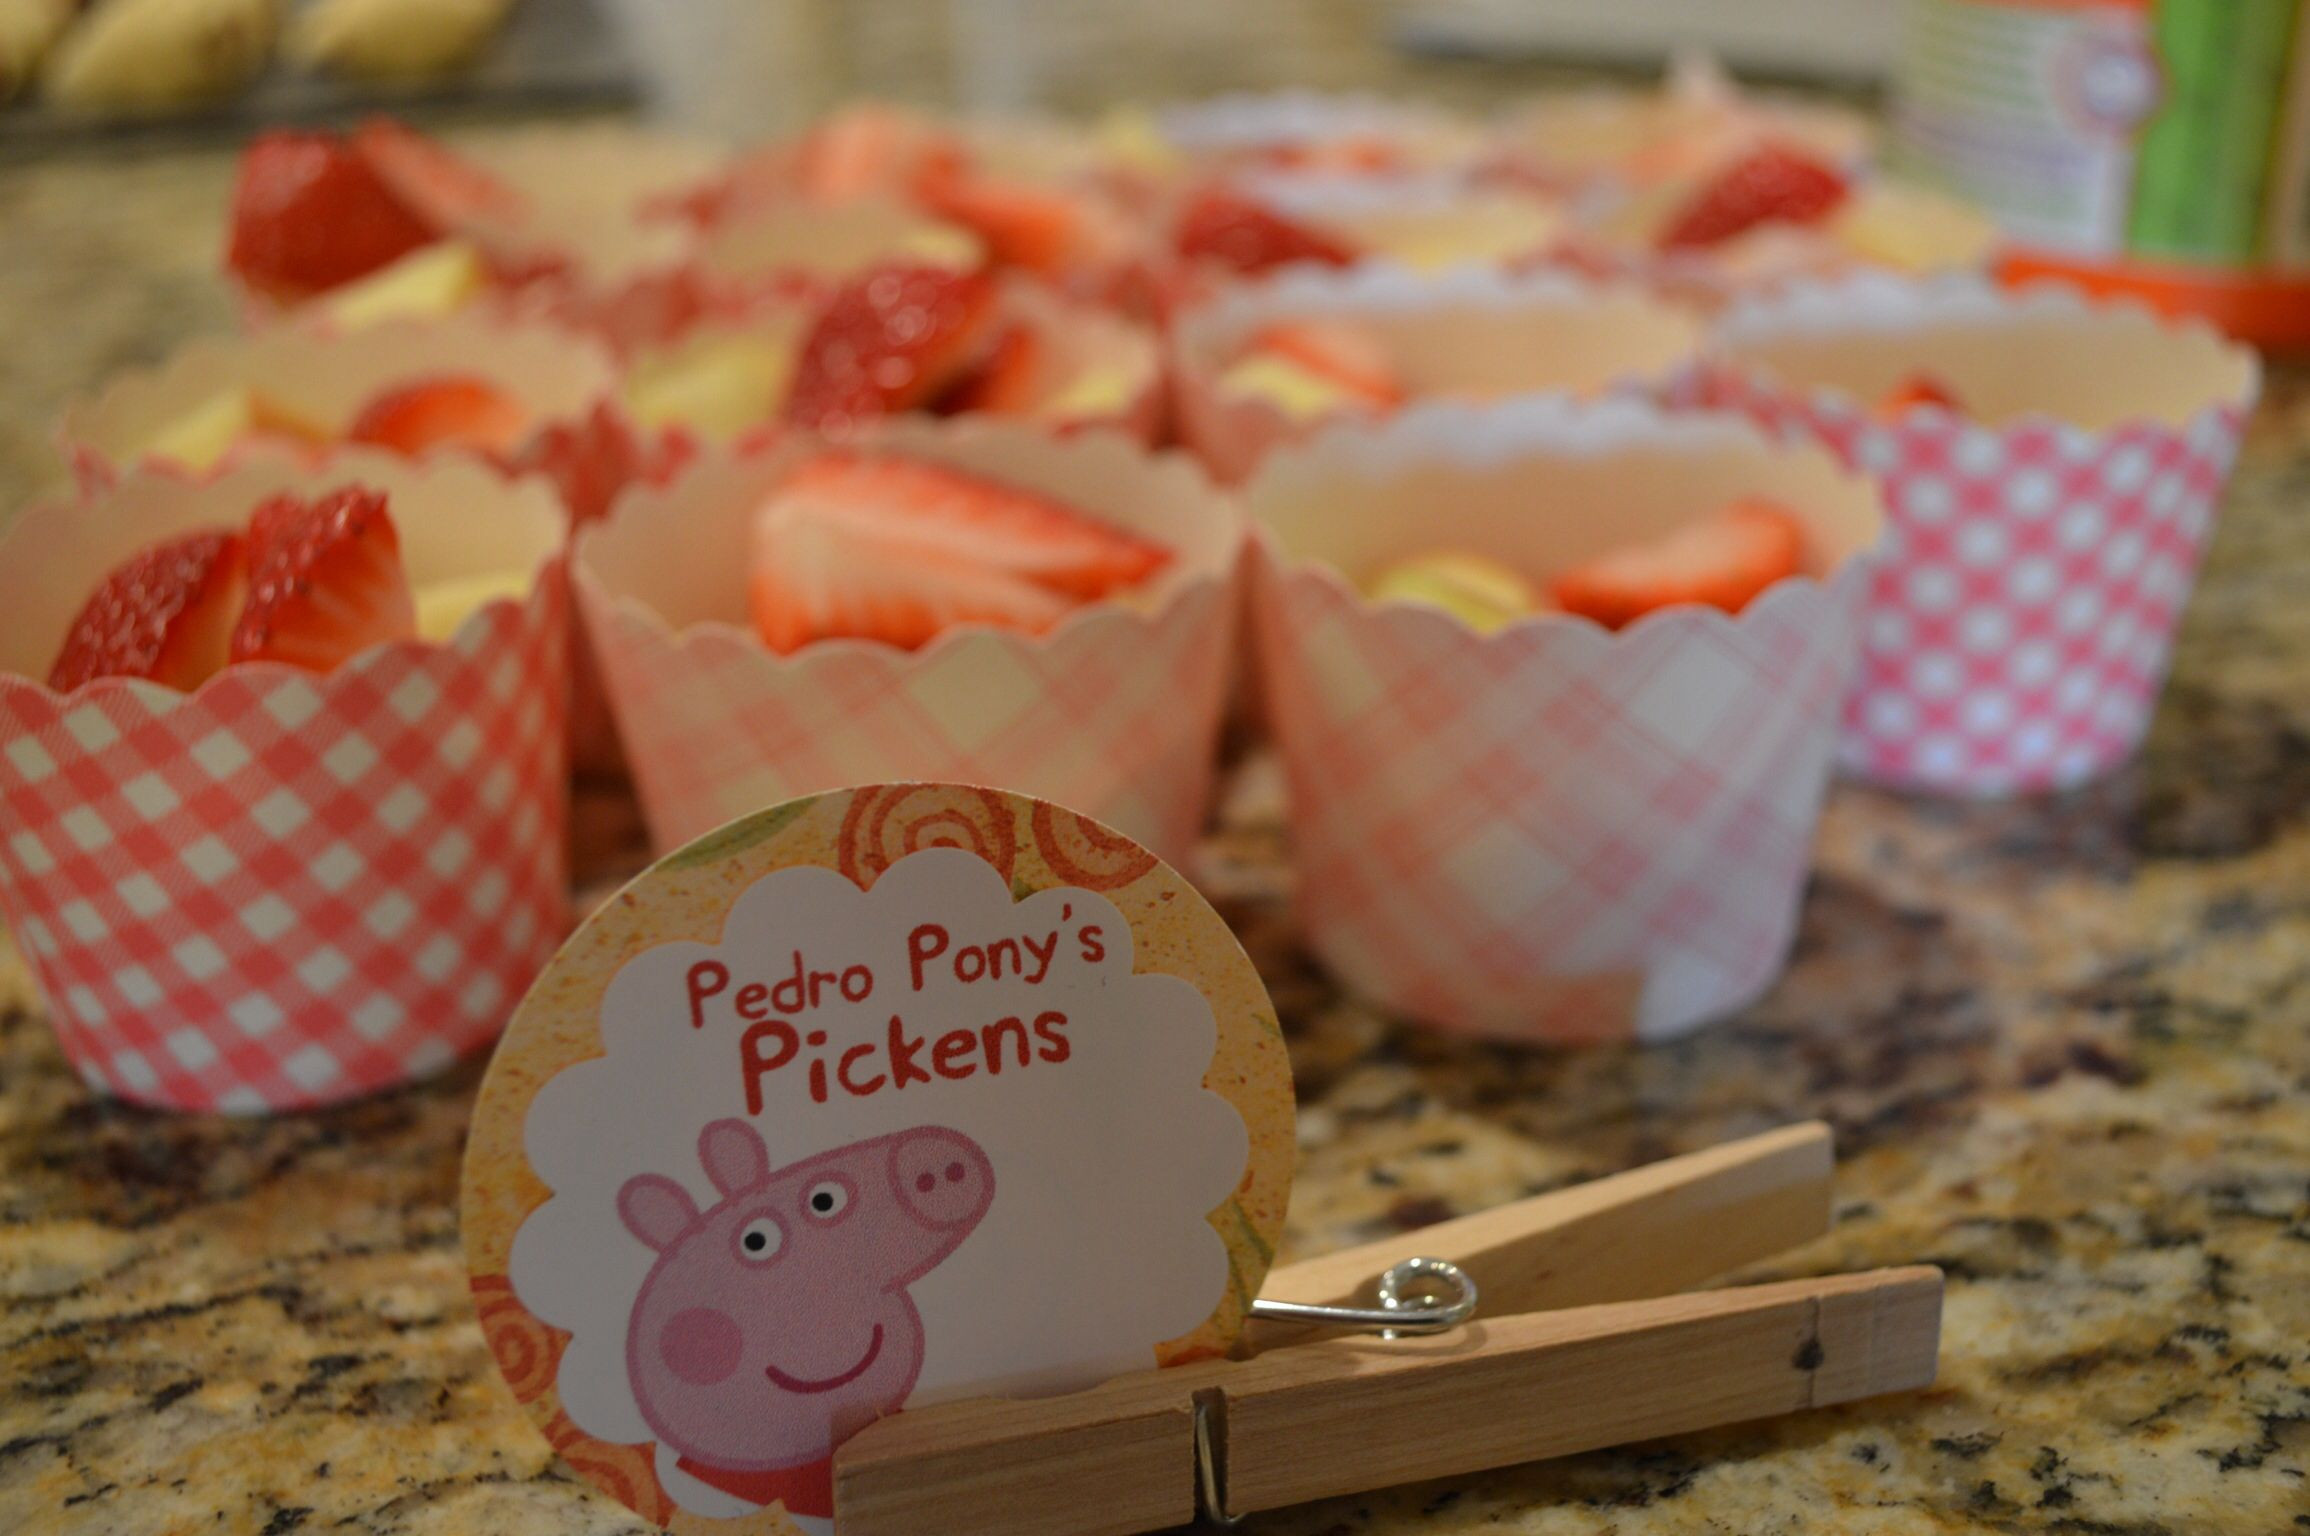 Peppa Pig Party Food Ideas
 Peppa Pig party food ideas